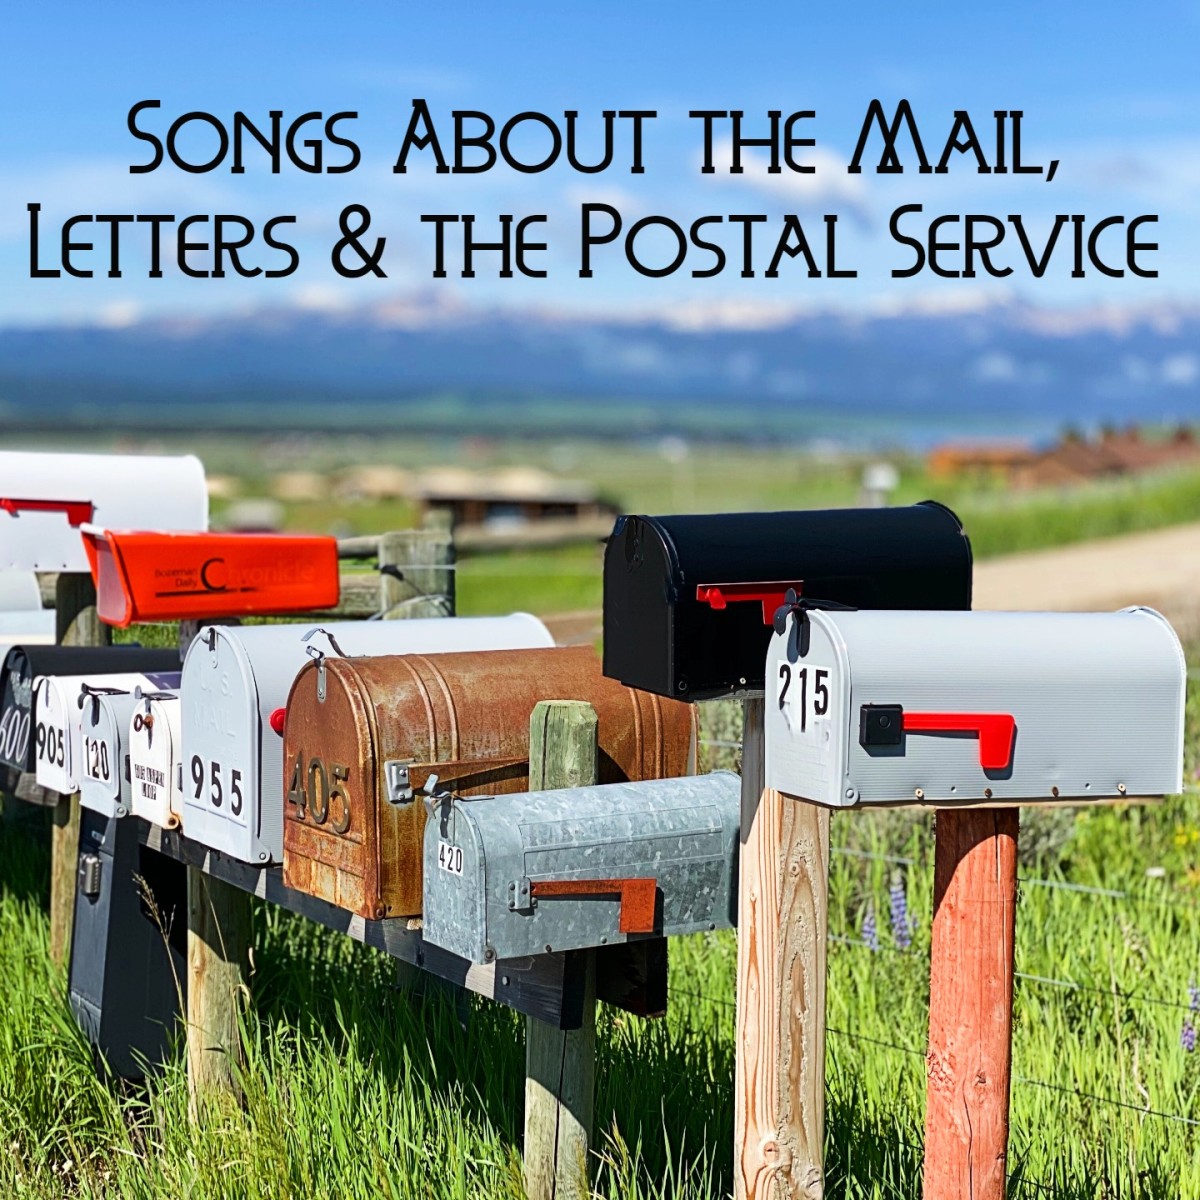 88 Songs About the Mail, Letters and the Postal Service